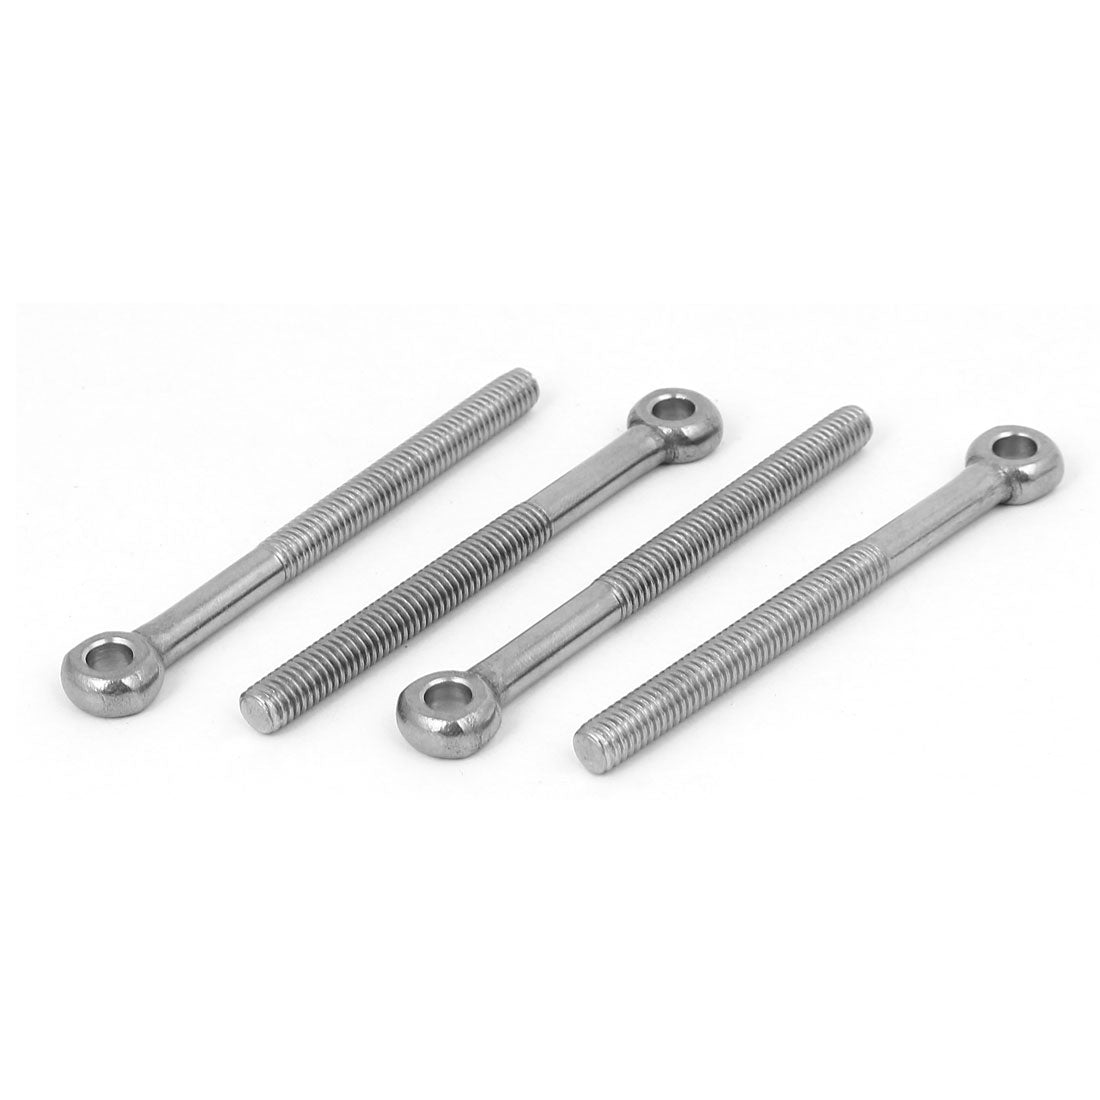 uxcell Uxcell M6 x 70mm 304 Stainless Steel Machine Shoulder Lift Eye Bolt Rigging 4pcs